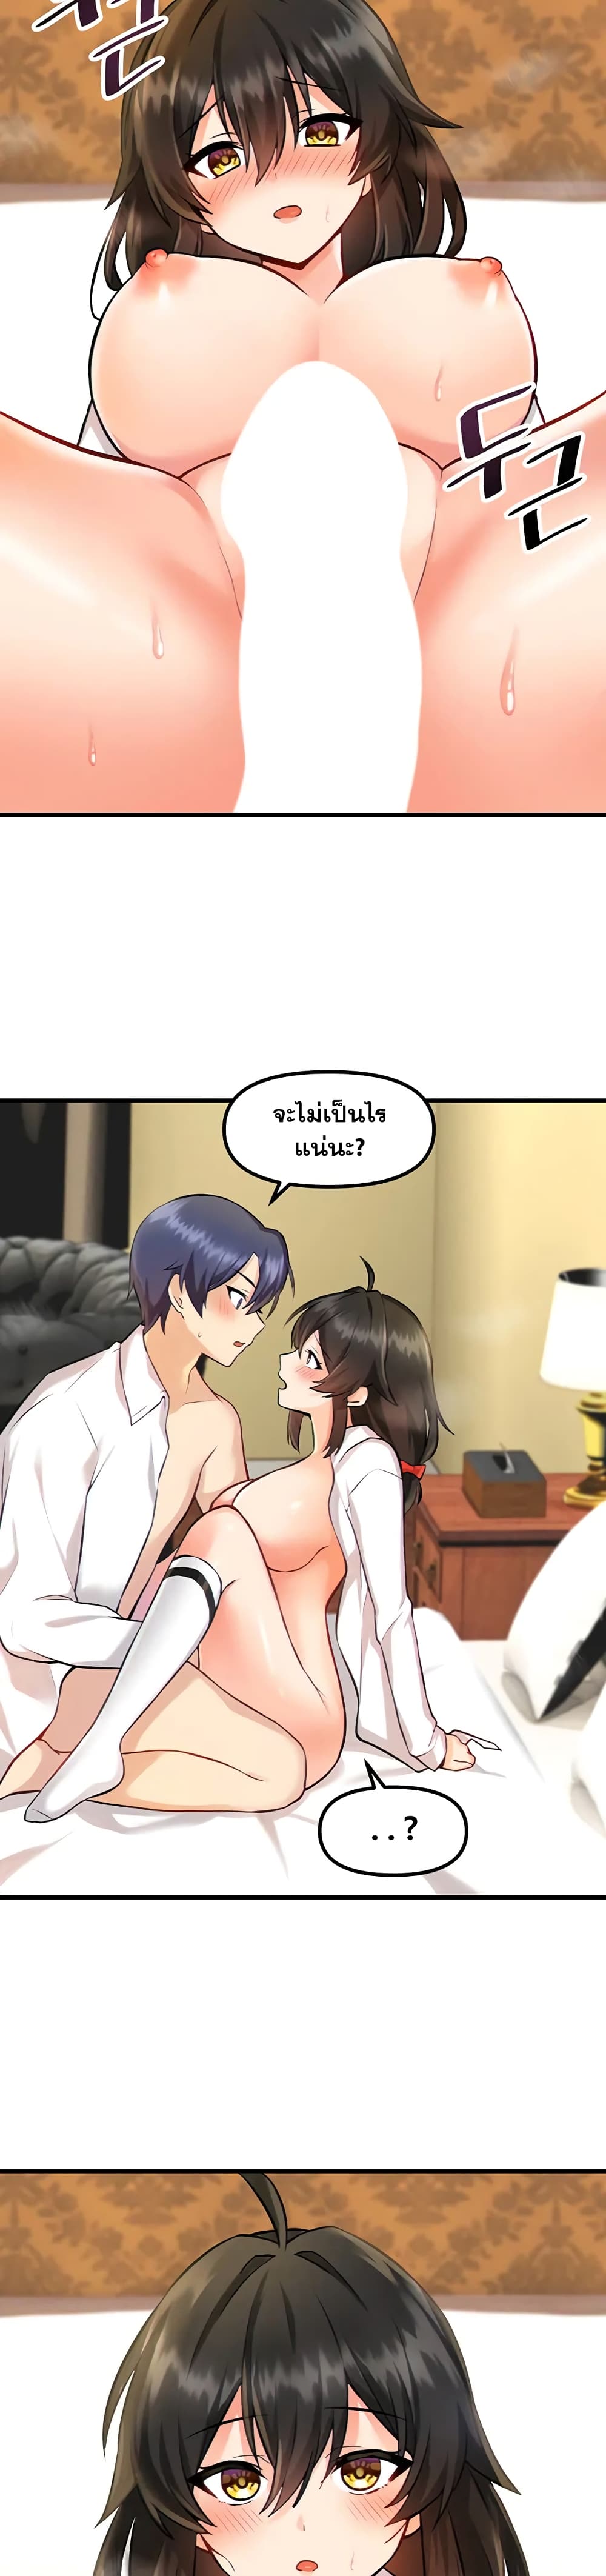 Trapped-in-the-Academys-Eroge-4_23.jpg